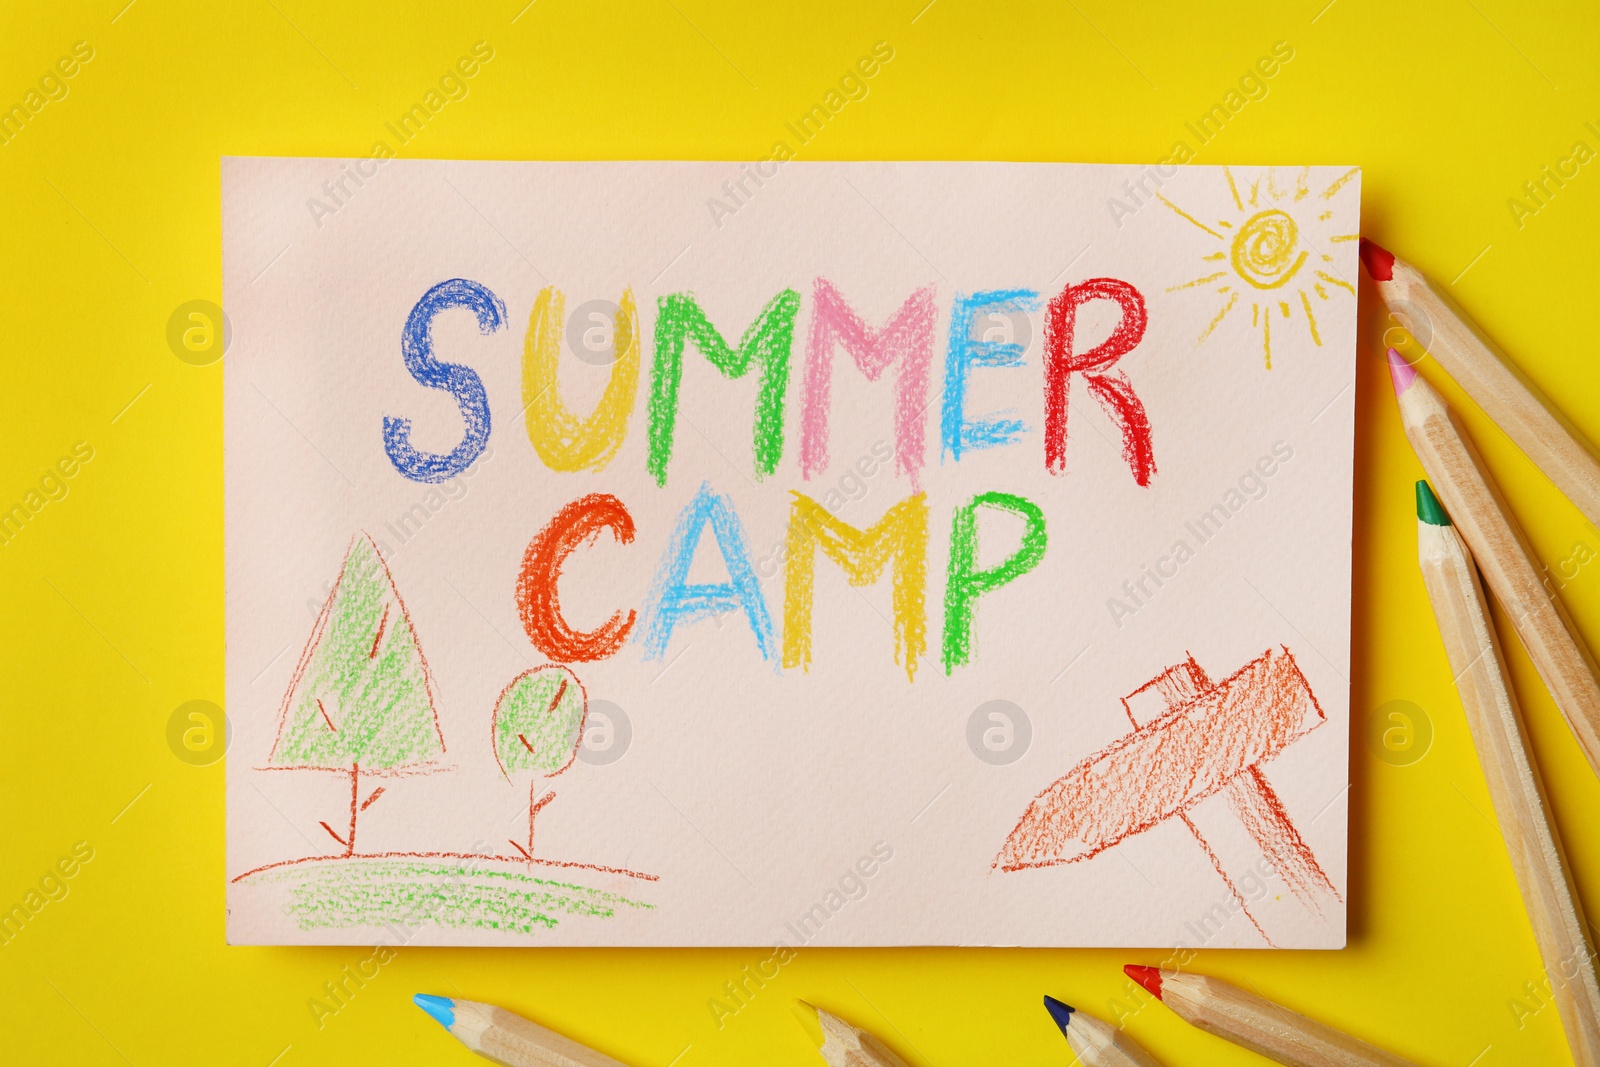 Photo of Paper with written text SUMMER CAMP, drawings and different pencils on color background, flat lay